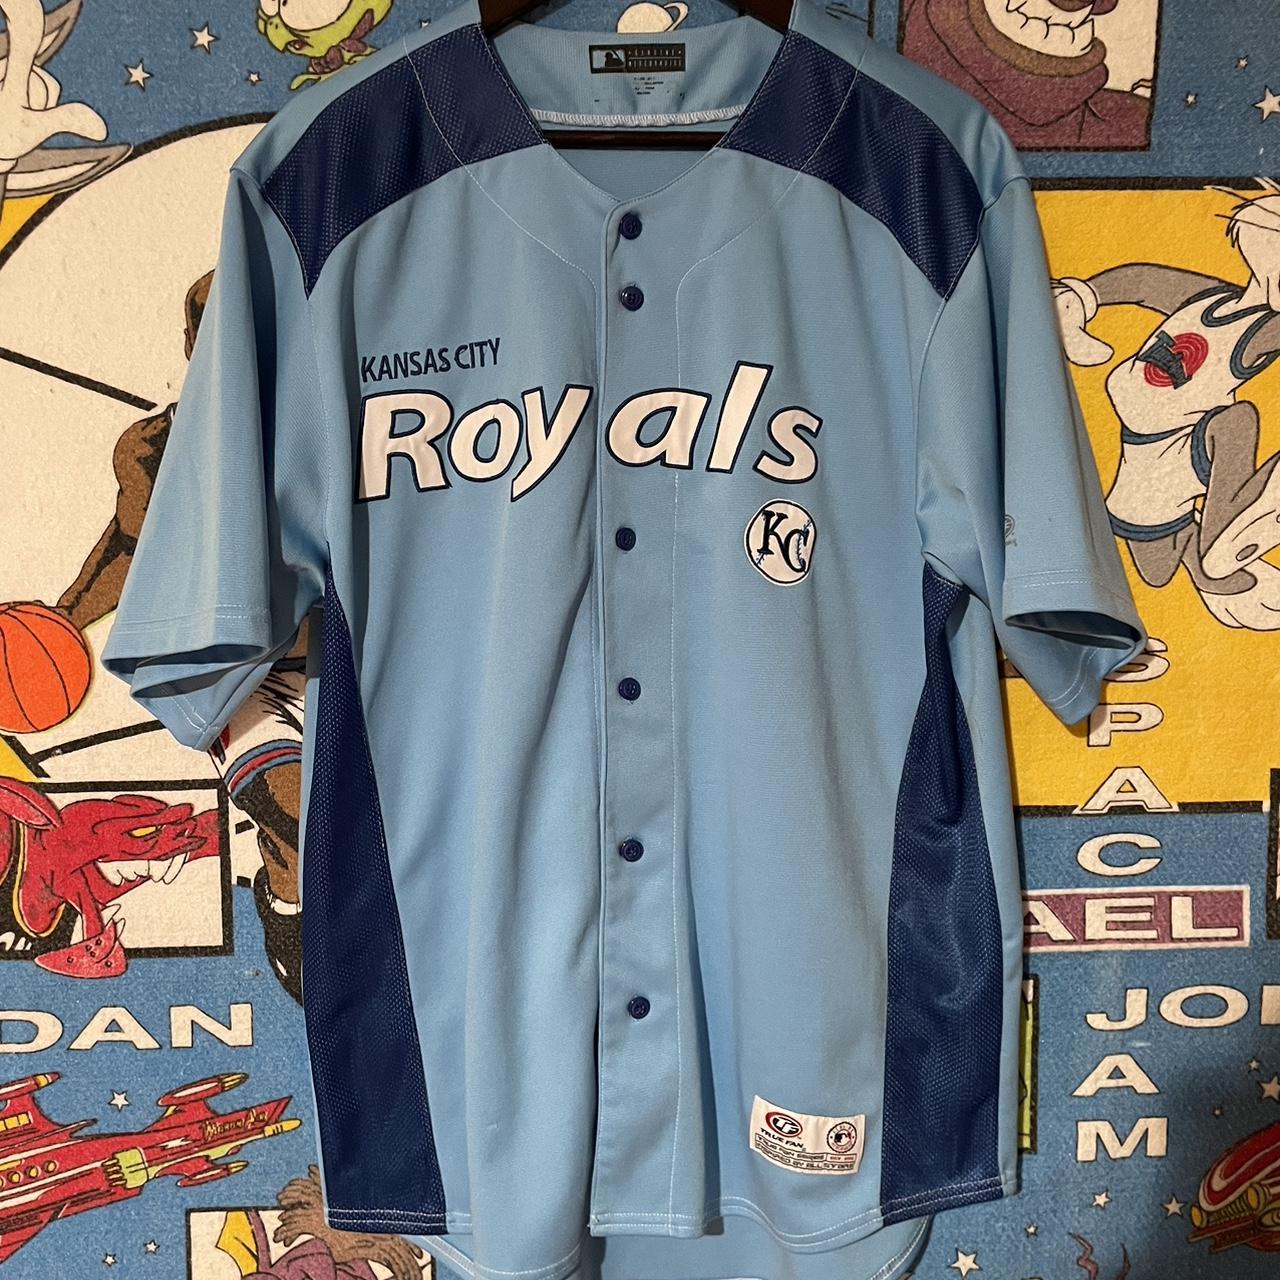 Kansas City royals jersey 31x24 All prices are - Depop